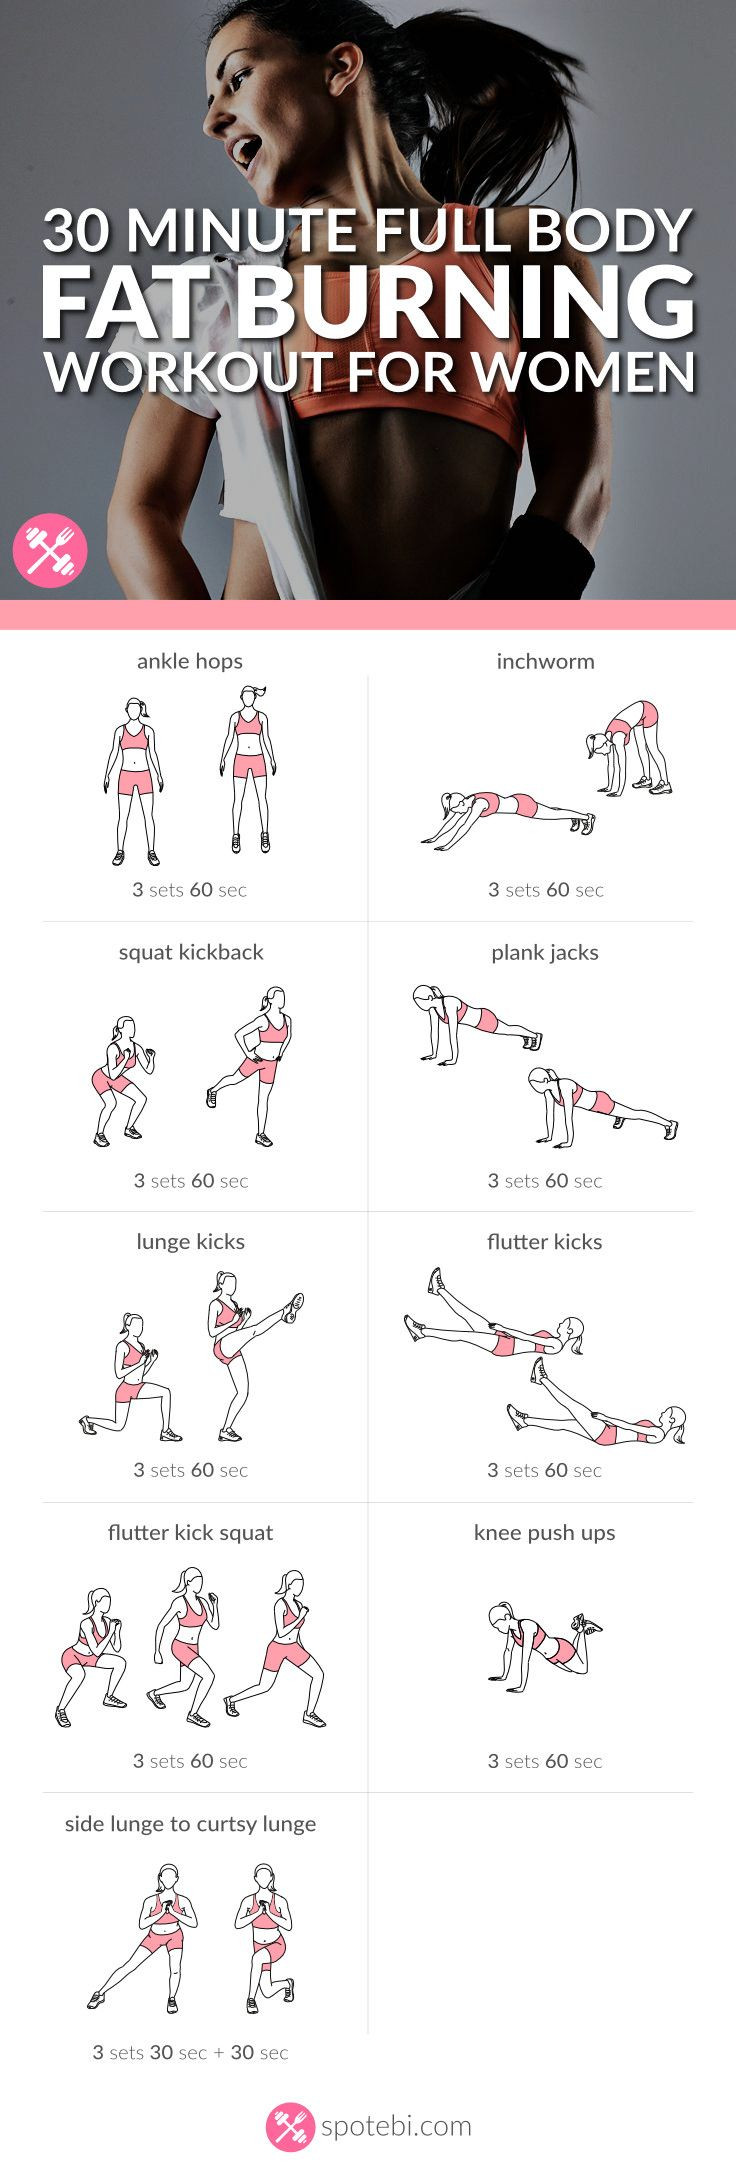 Fat Burning Workout With Weights
 Pin on Getting in shape